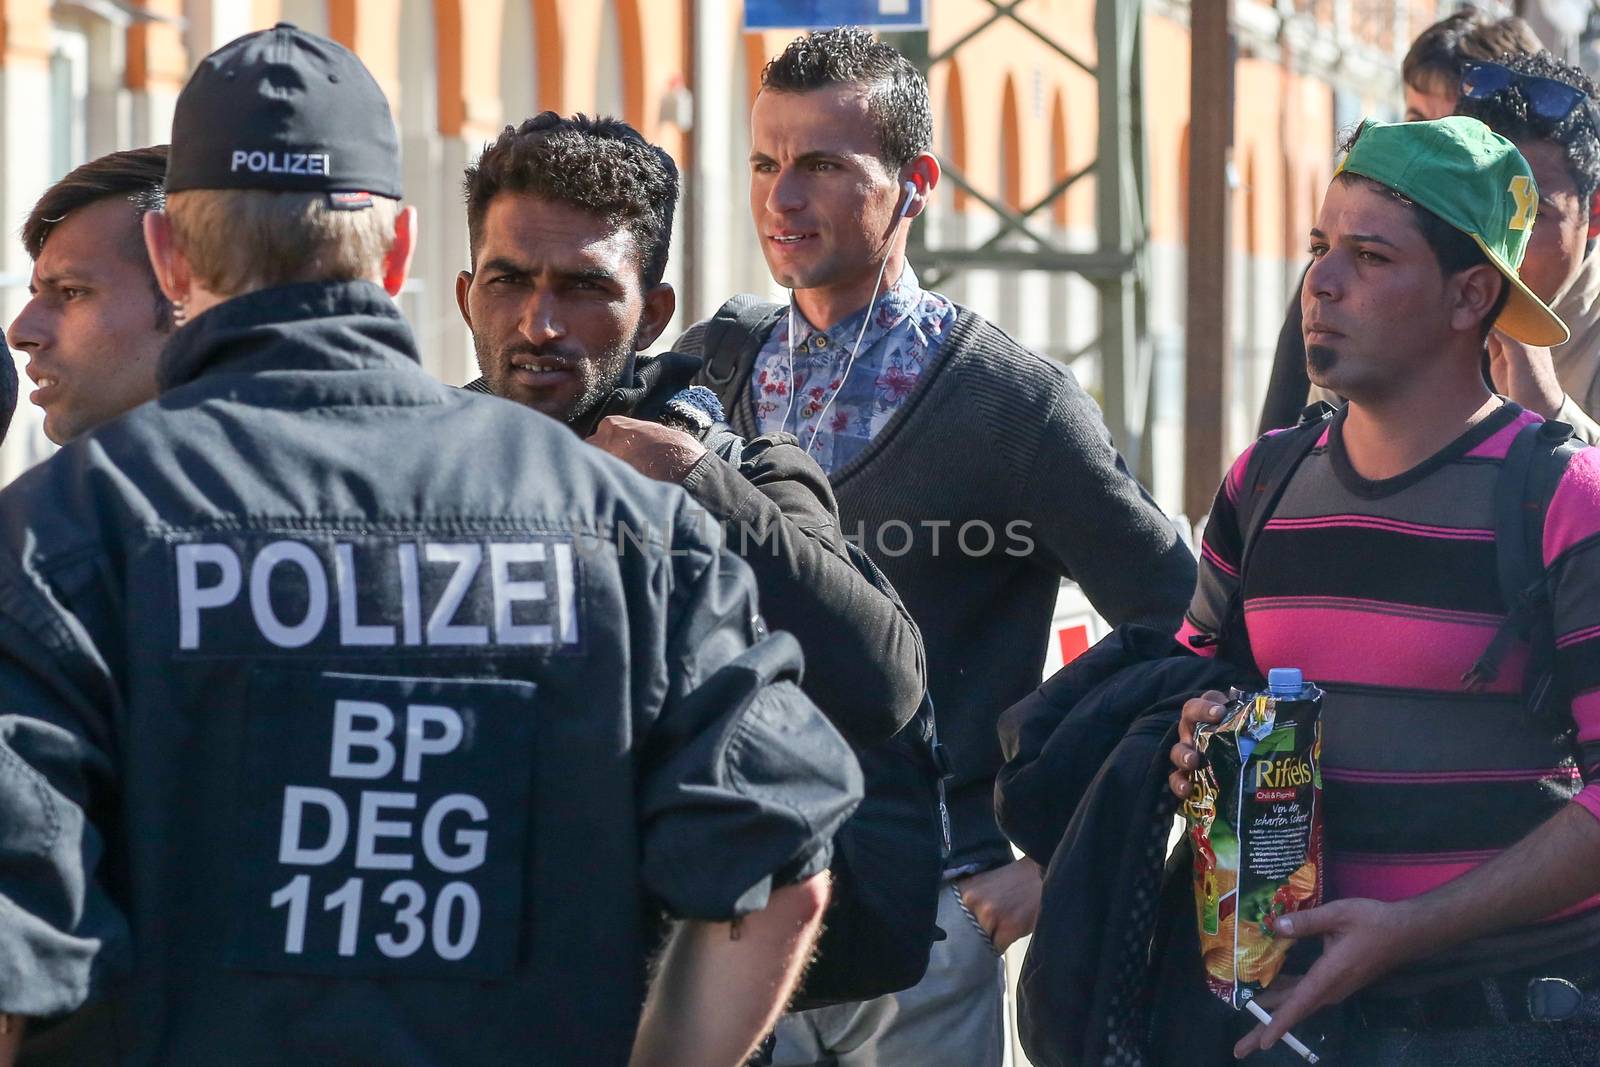  GERMANY, Passau: Security officials stand guard as refugees wait in long queues in the border town of Passau, Germany on September 21, 2015 amid the reintroduction of border controls in Germany, Austria, and a number of other EU countries, aimed at slowing the flow of refugees from war-torn Syria.